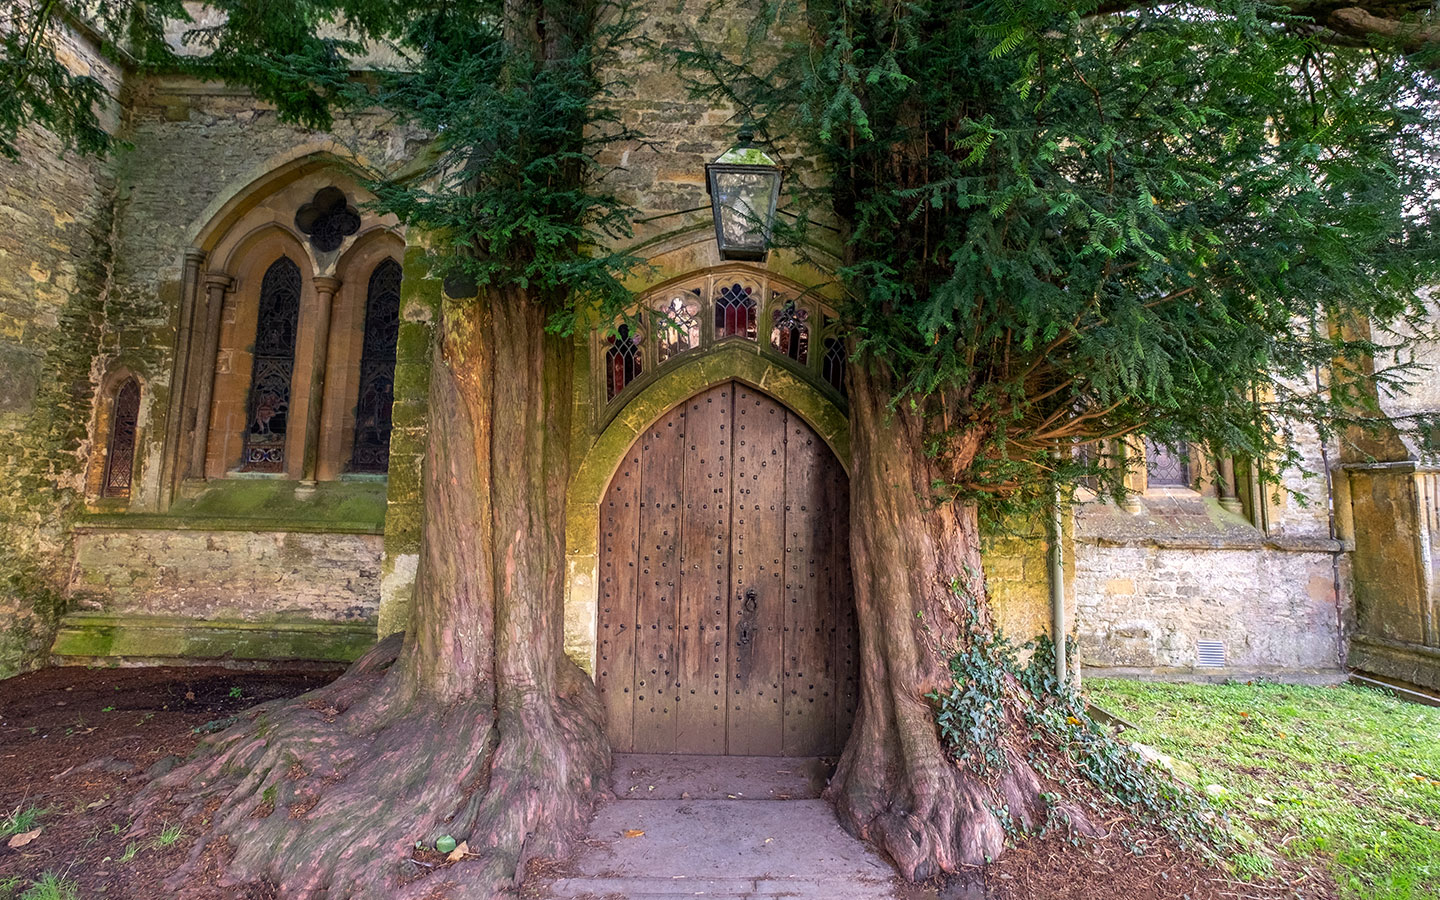 The Yew Tree Door at St Edwards Church in Stow-on-the-Wold